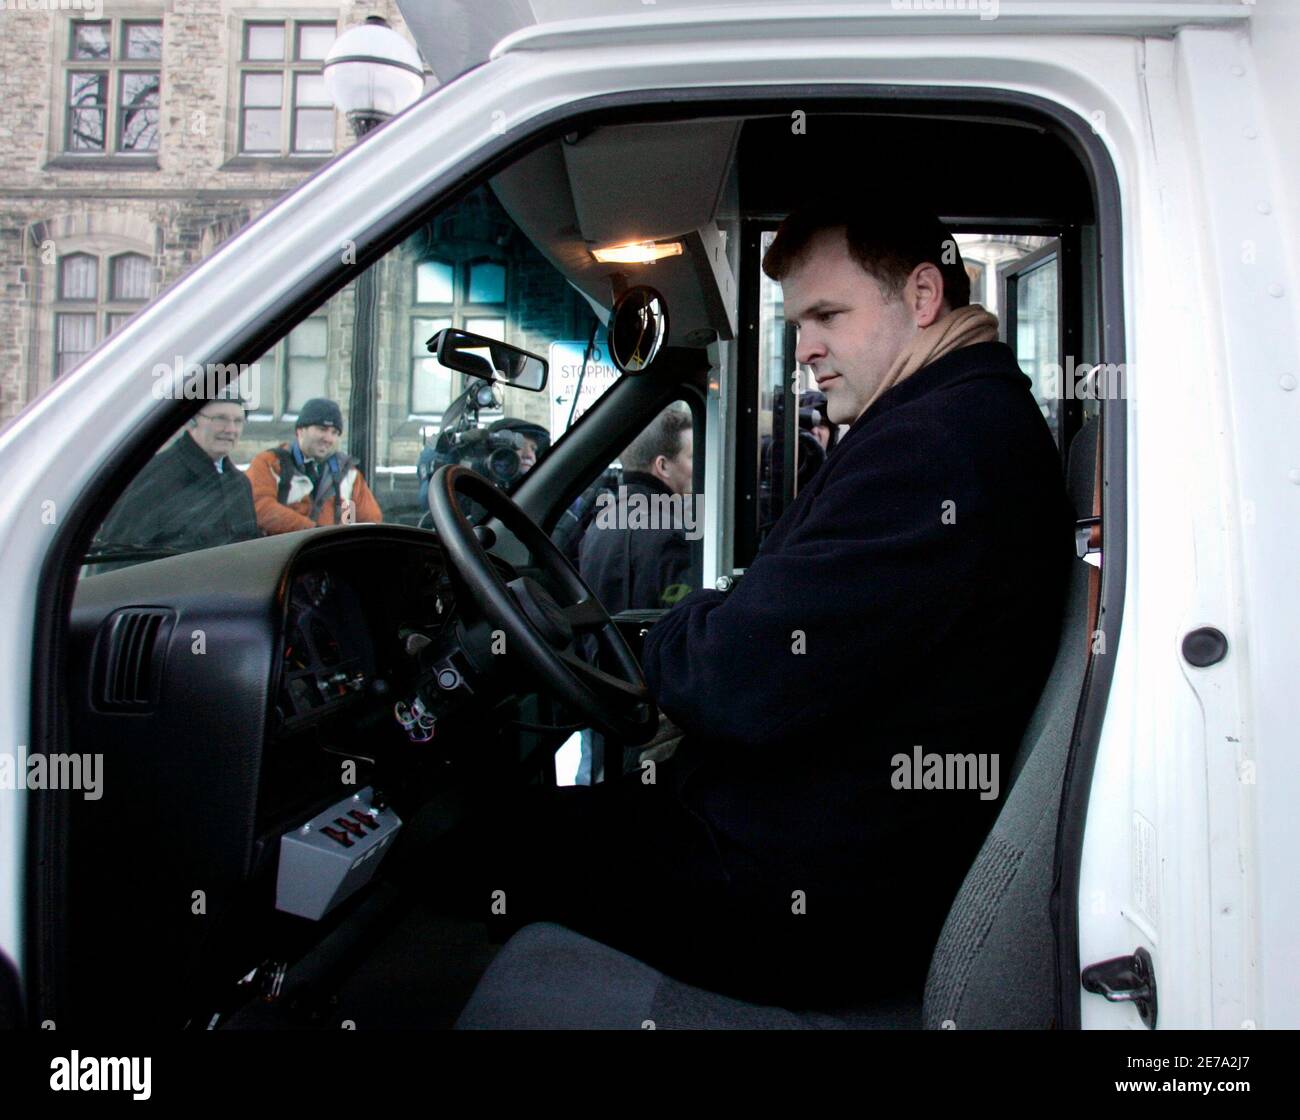 Canada's Environment Minister John Baird looks at a hybrid bus while sitting in the driver's seat on Parliament Hill in Ottawa January 17, 2007. Canada's minority Conservative government announced it was investing C$230 million ($196 million) in clean energy technology over the next four years.        REUTERS/Chris Wattie   (CANADA) Stock Photo